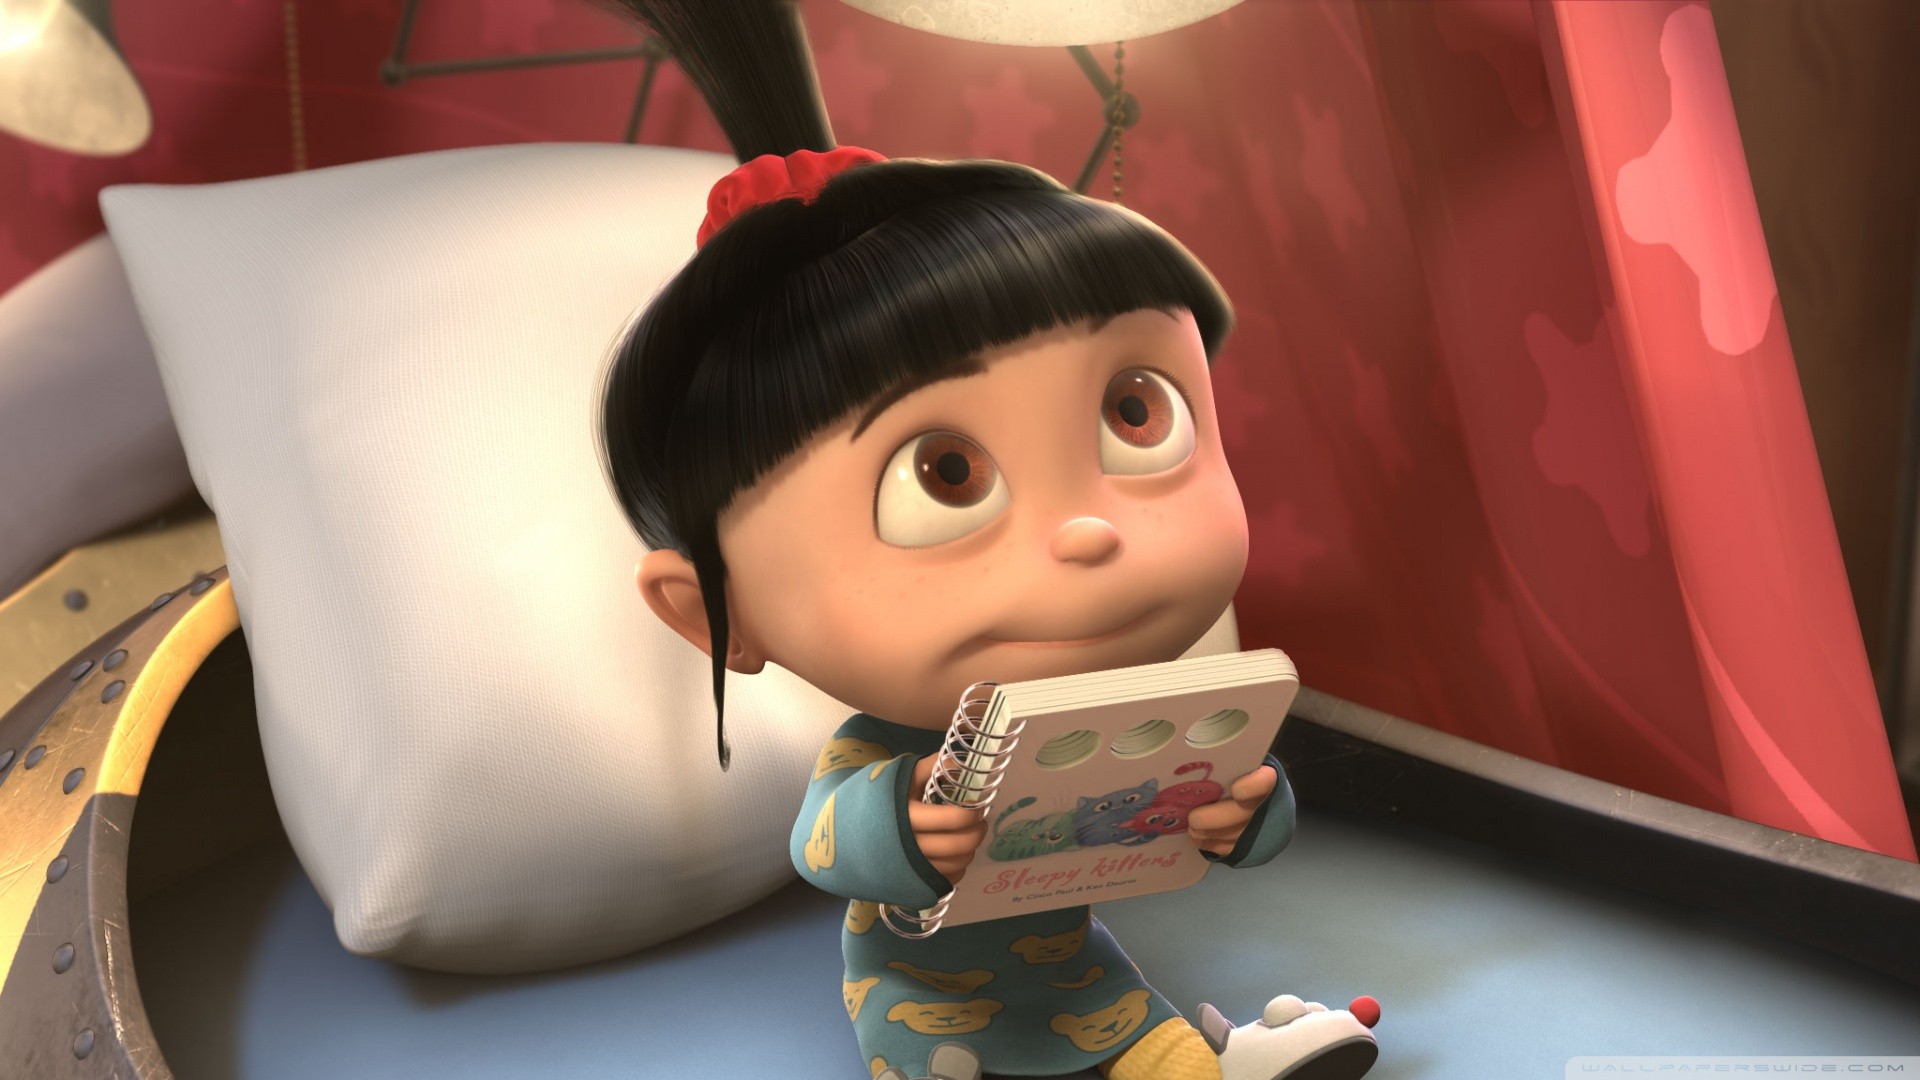 General 1920x1080 Despicable Me animated movies books dark hair baby movies film stills